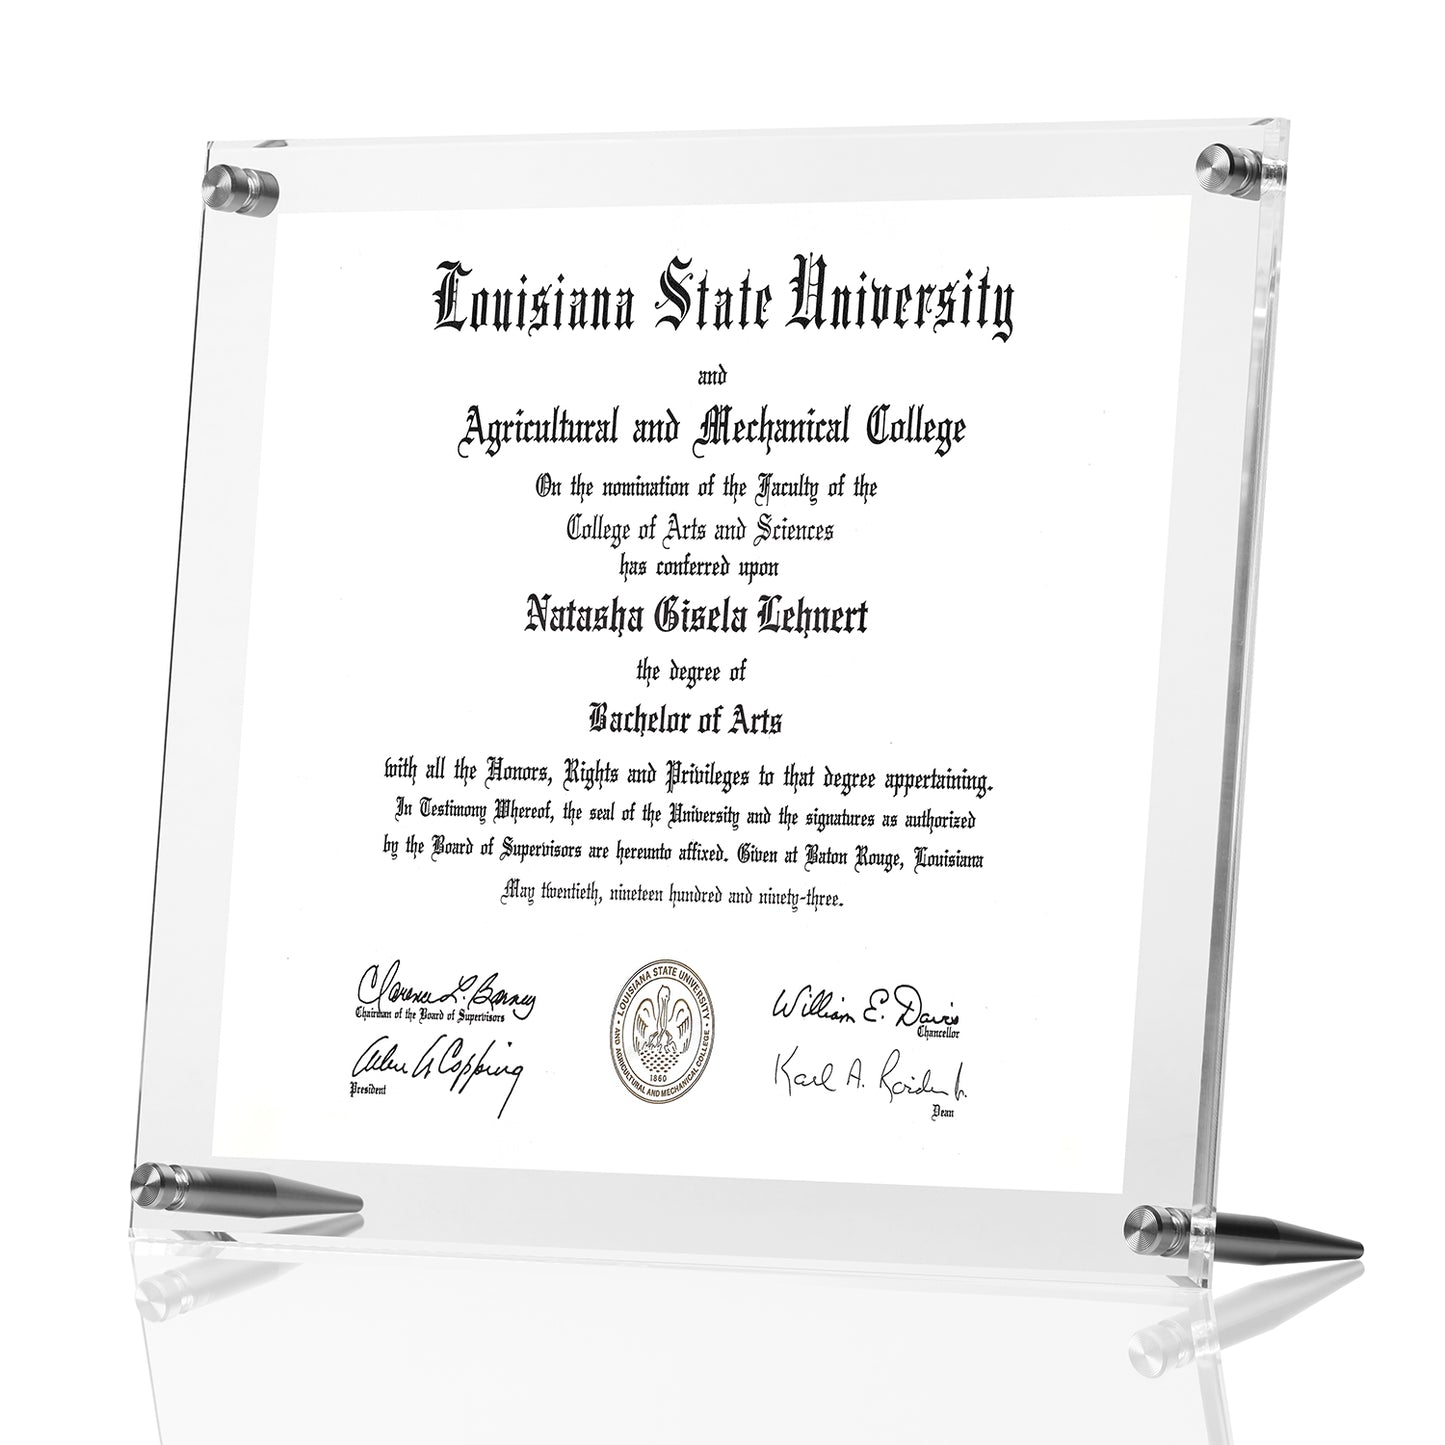 Acrylic Bevel Tabletop Float Frame for 9x12" Art or Certificates